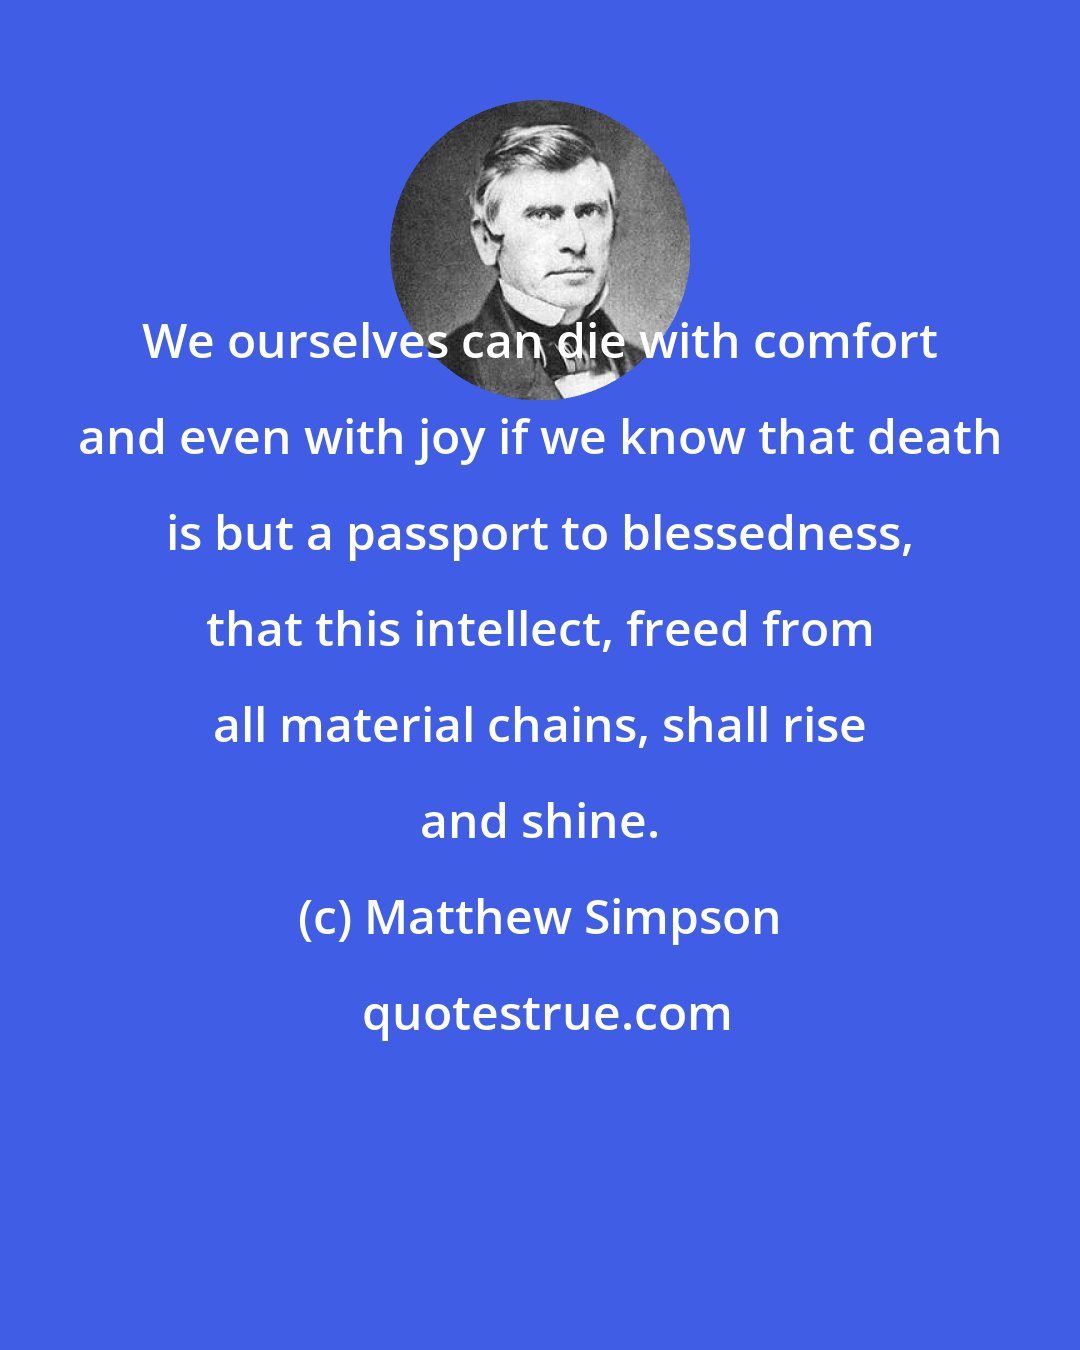 Matthew Simpson: We ourselves can die with comfort and even with joy if we know that death is but a passport to blessedness, that this intellect, freed from all material chains, shall rise and shine.